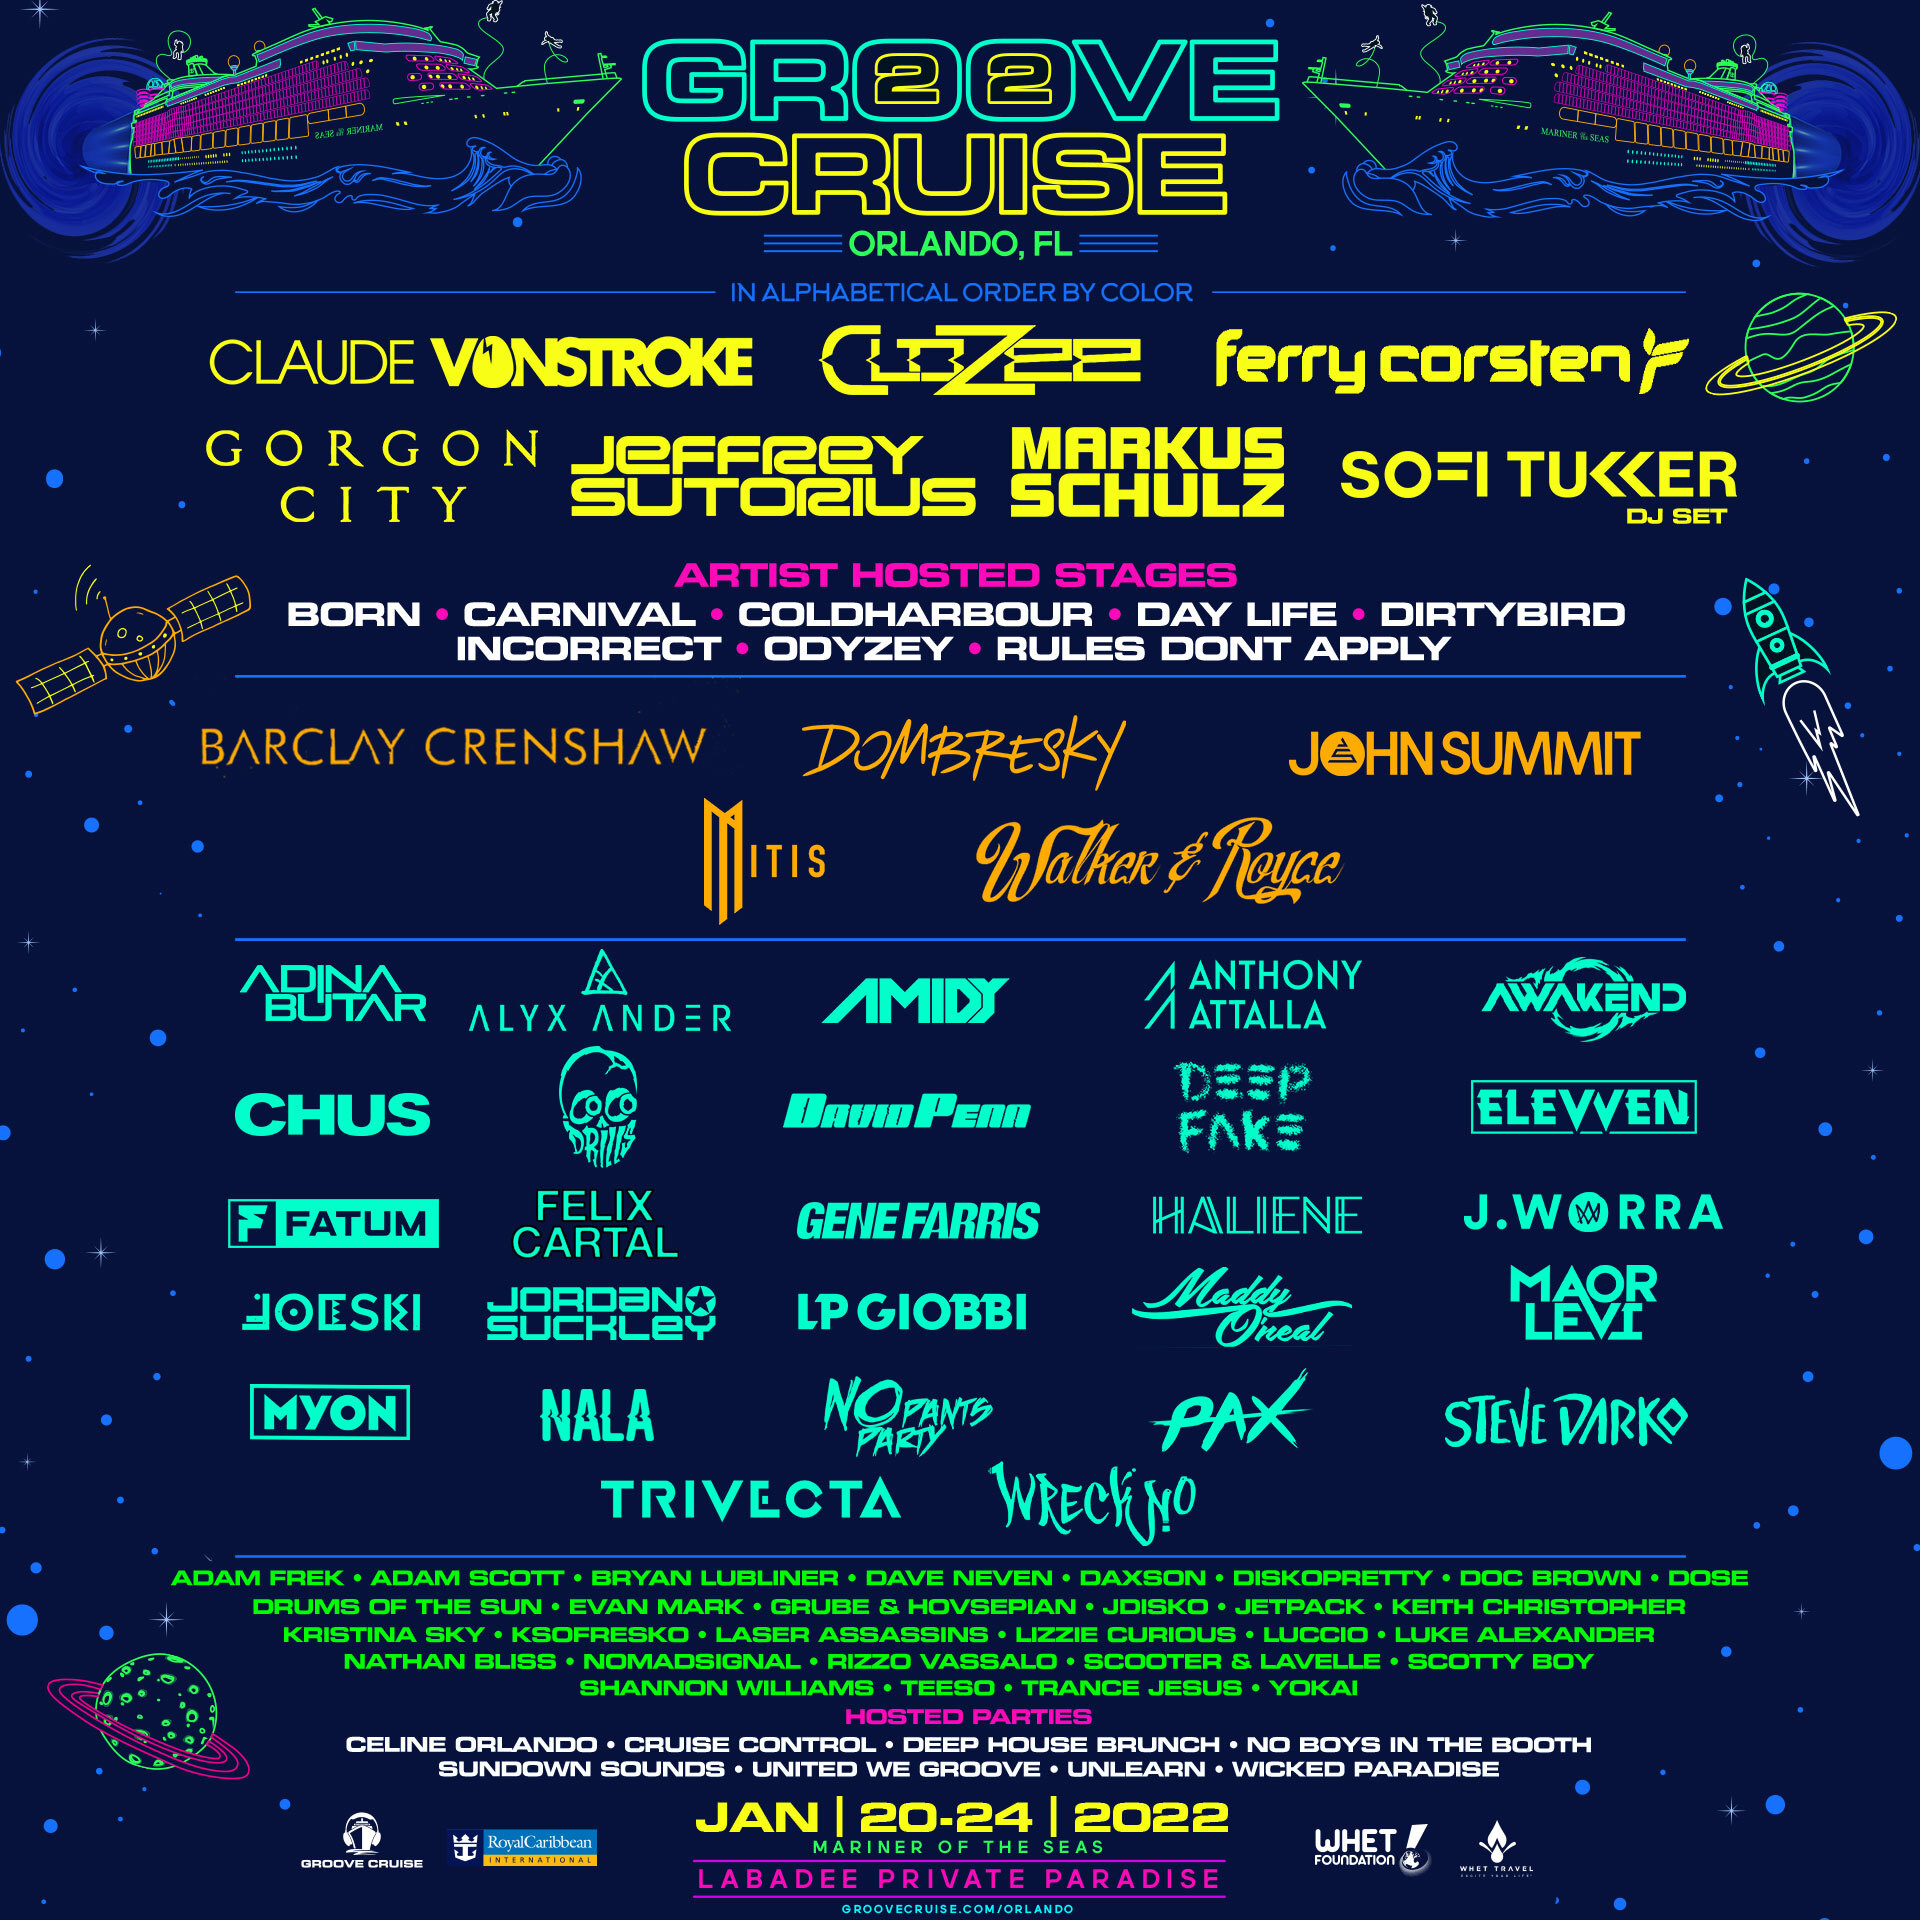 GROOVE CRUISE ANNOUNCES IT’S BIGGEST ARTIST REVEAL IN THEIR HISTORY FOR